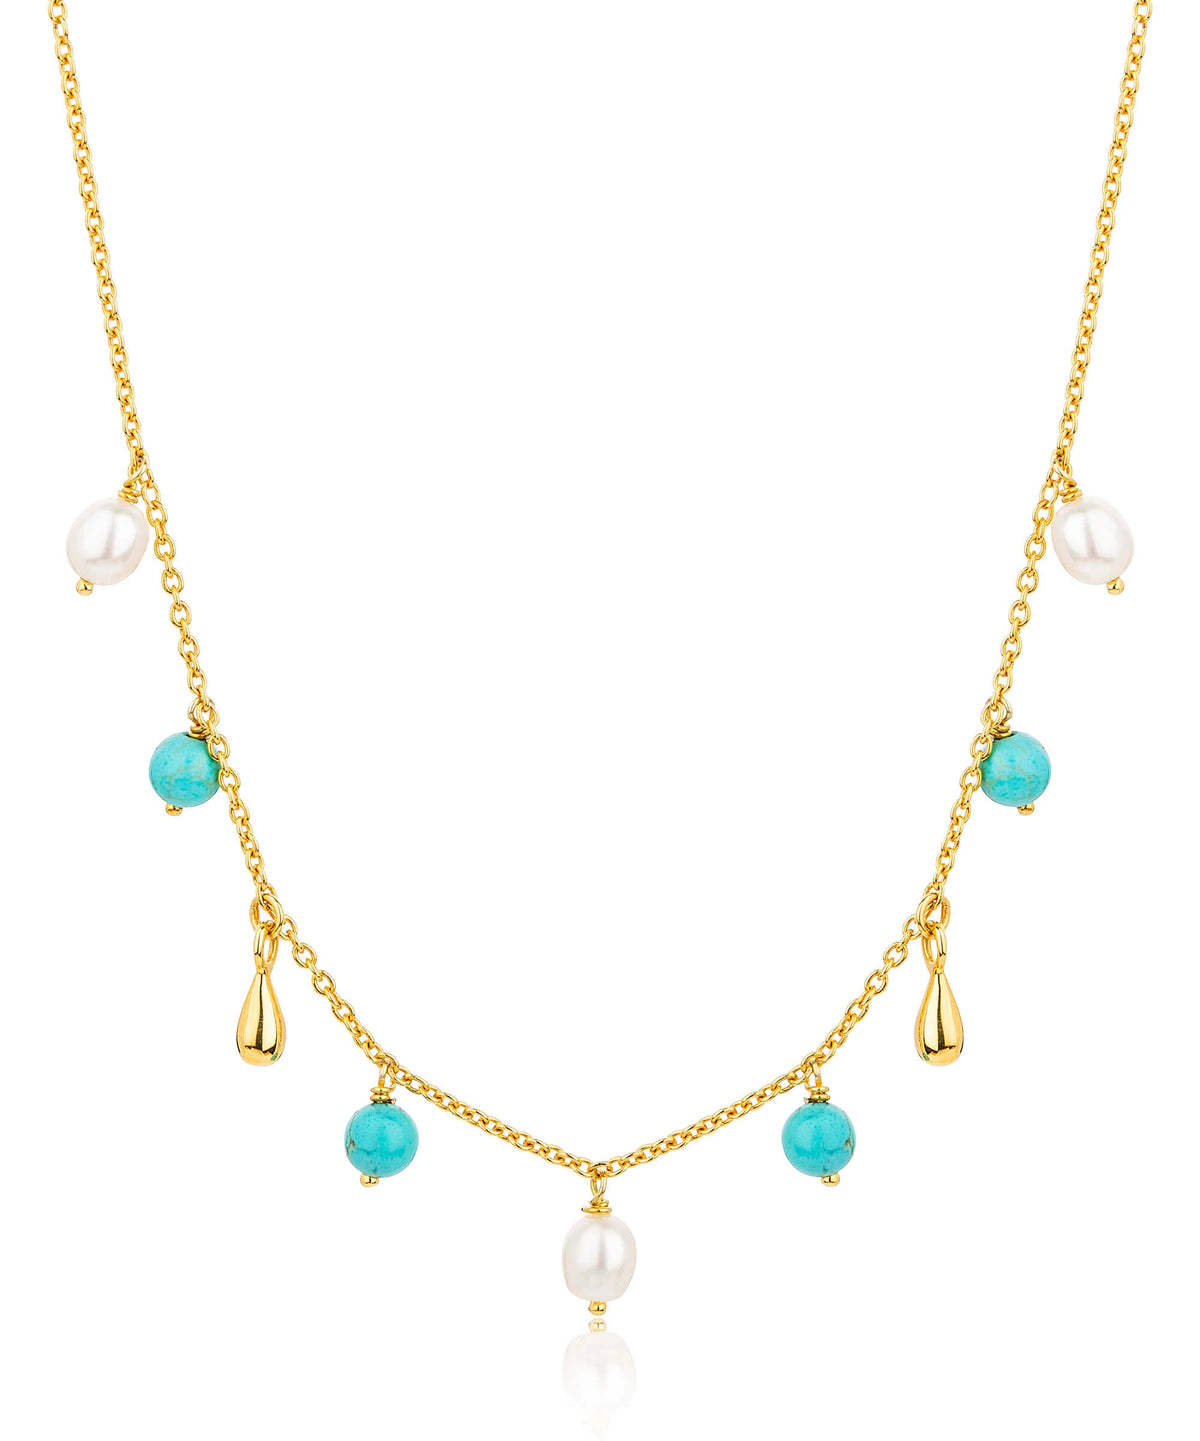 Gold chain choker necklace with pearl, gold and turquoise charms